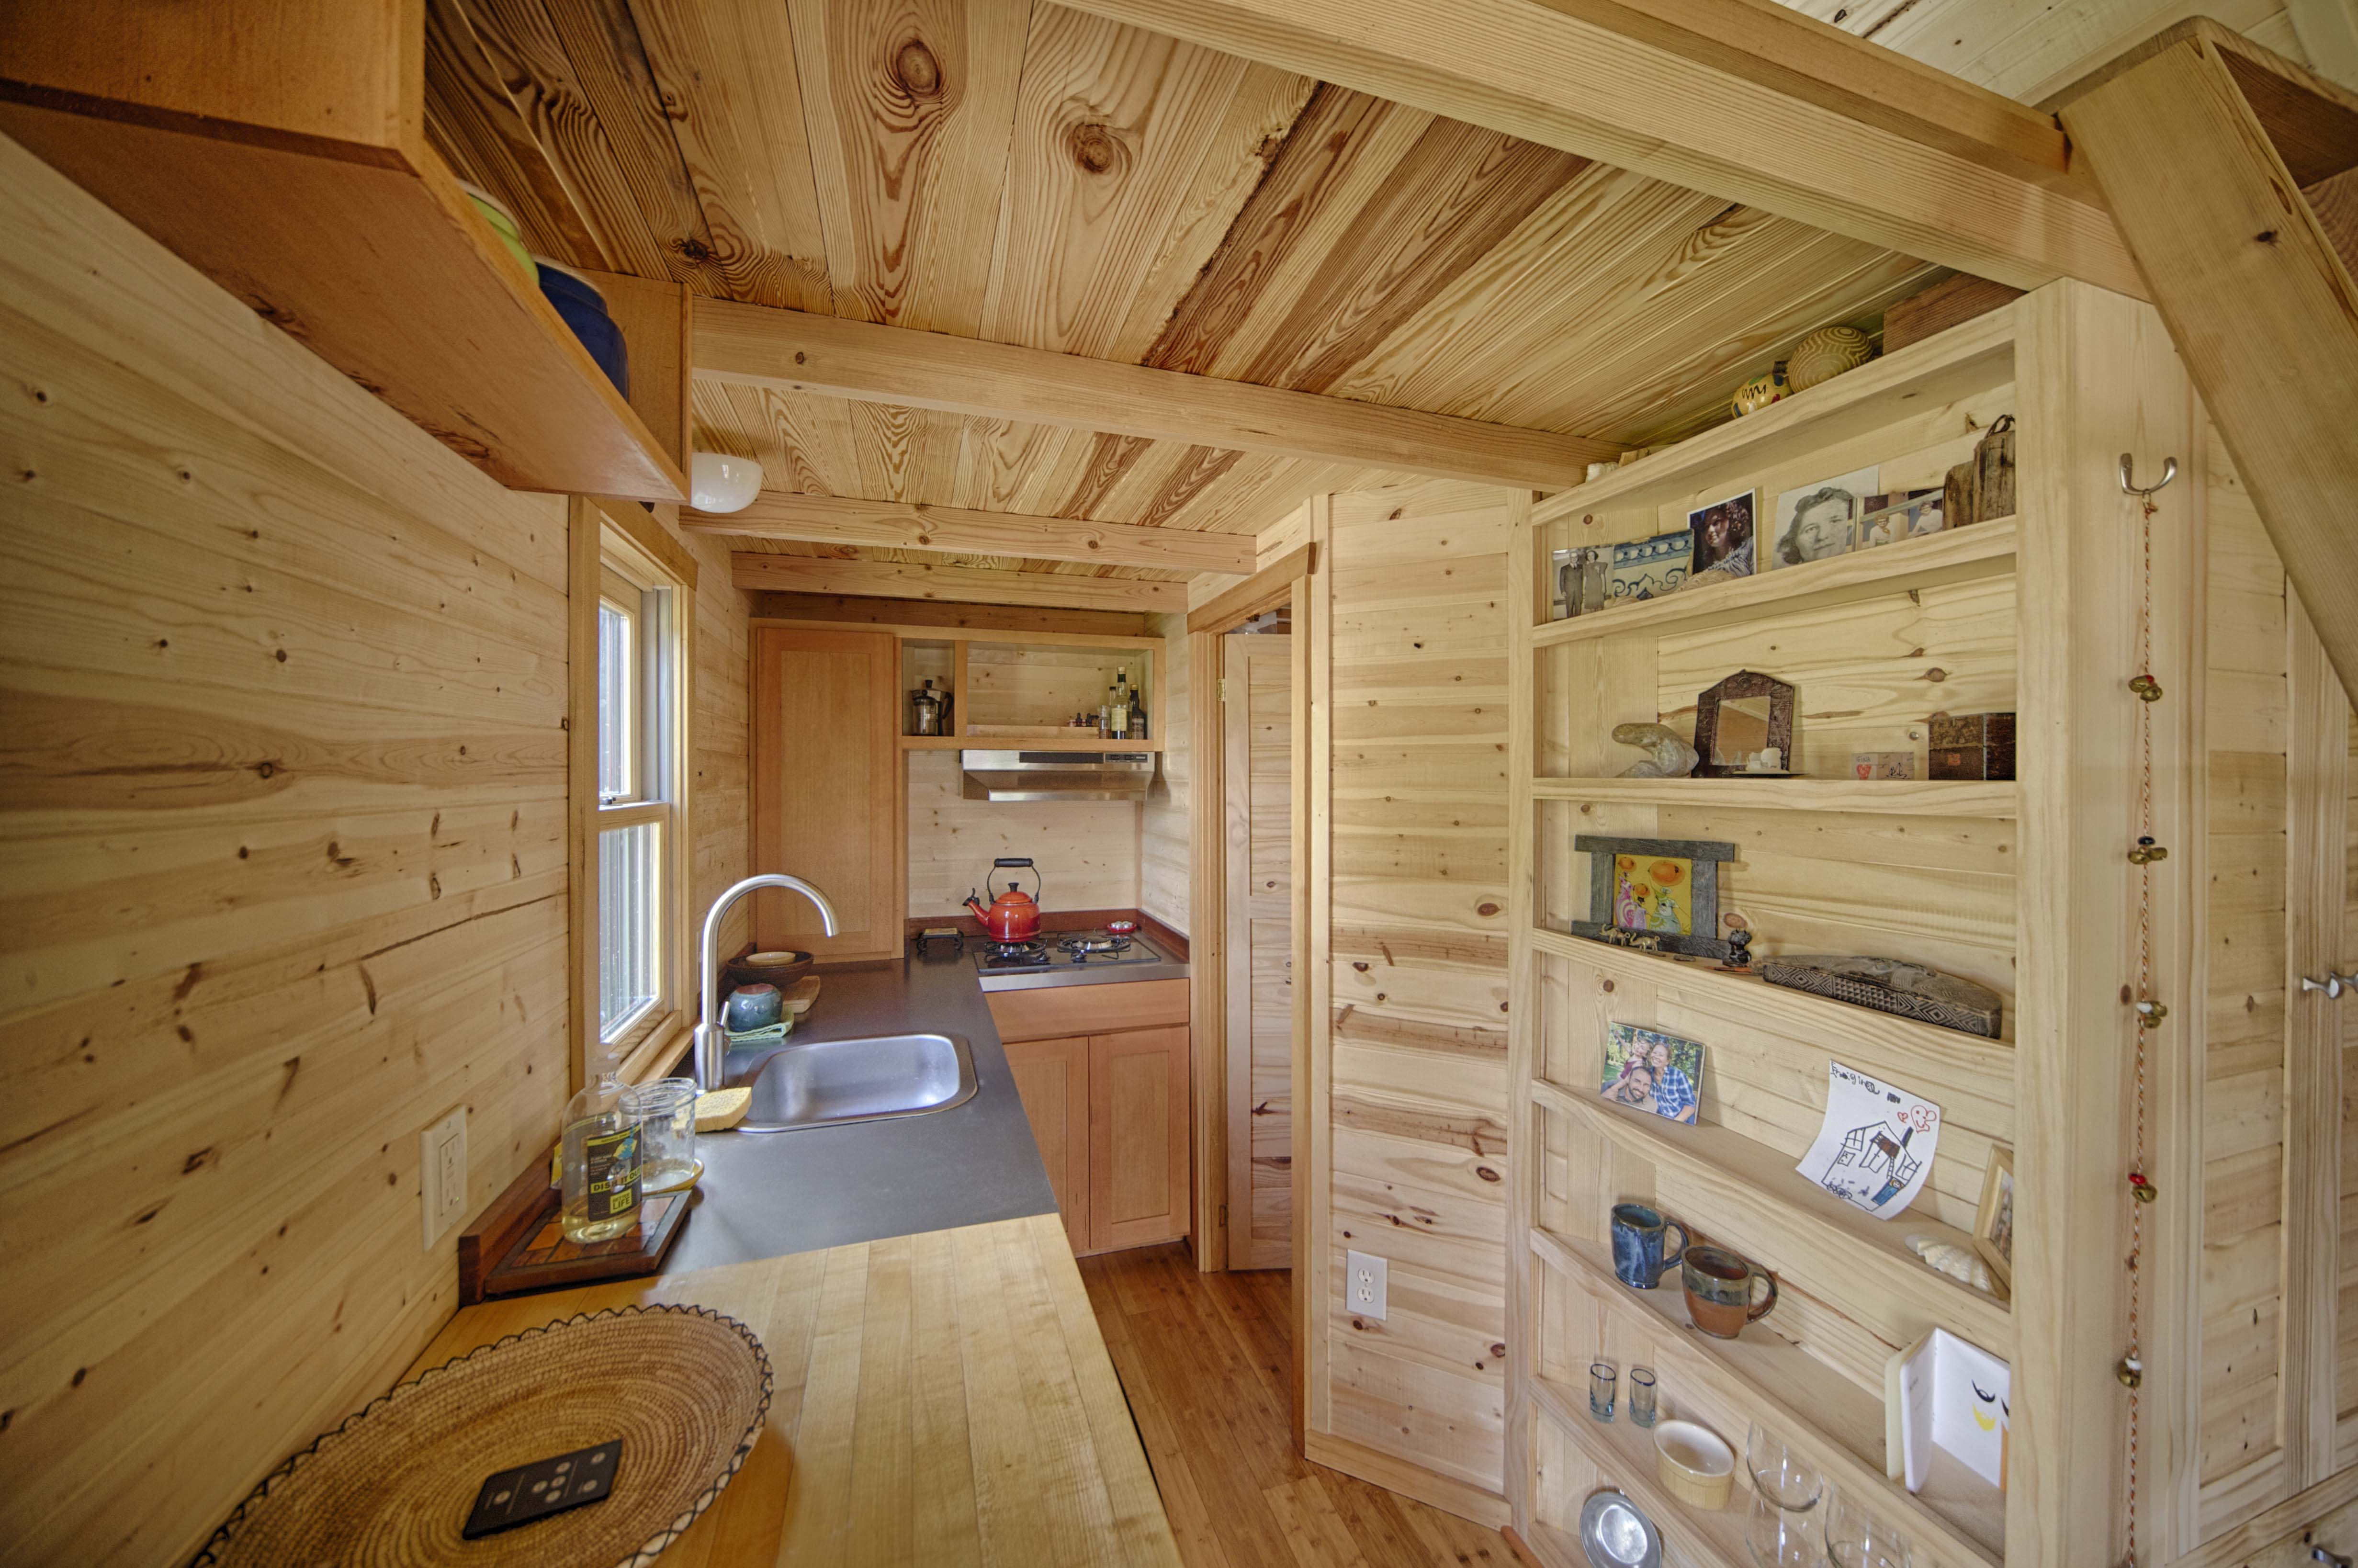 The Sweet Pea Tiny  House  Plans  PADtinyhouses com